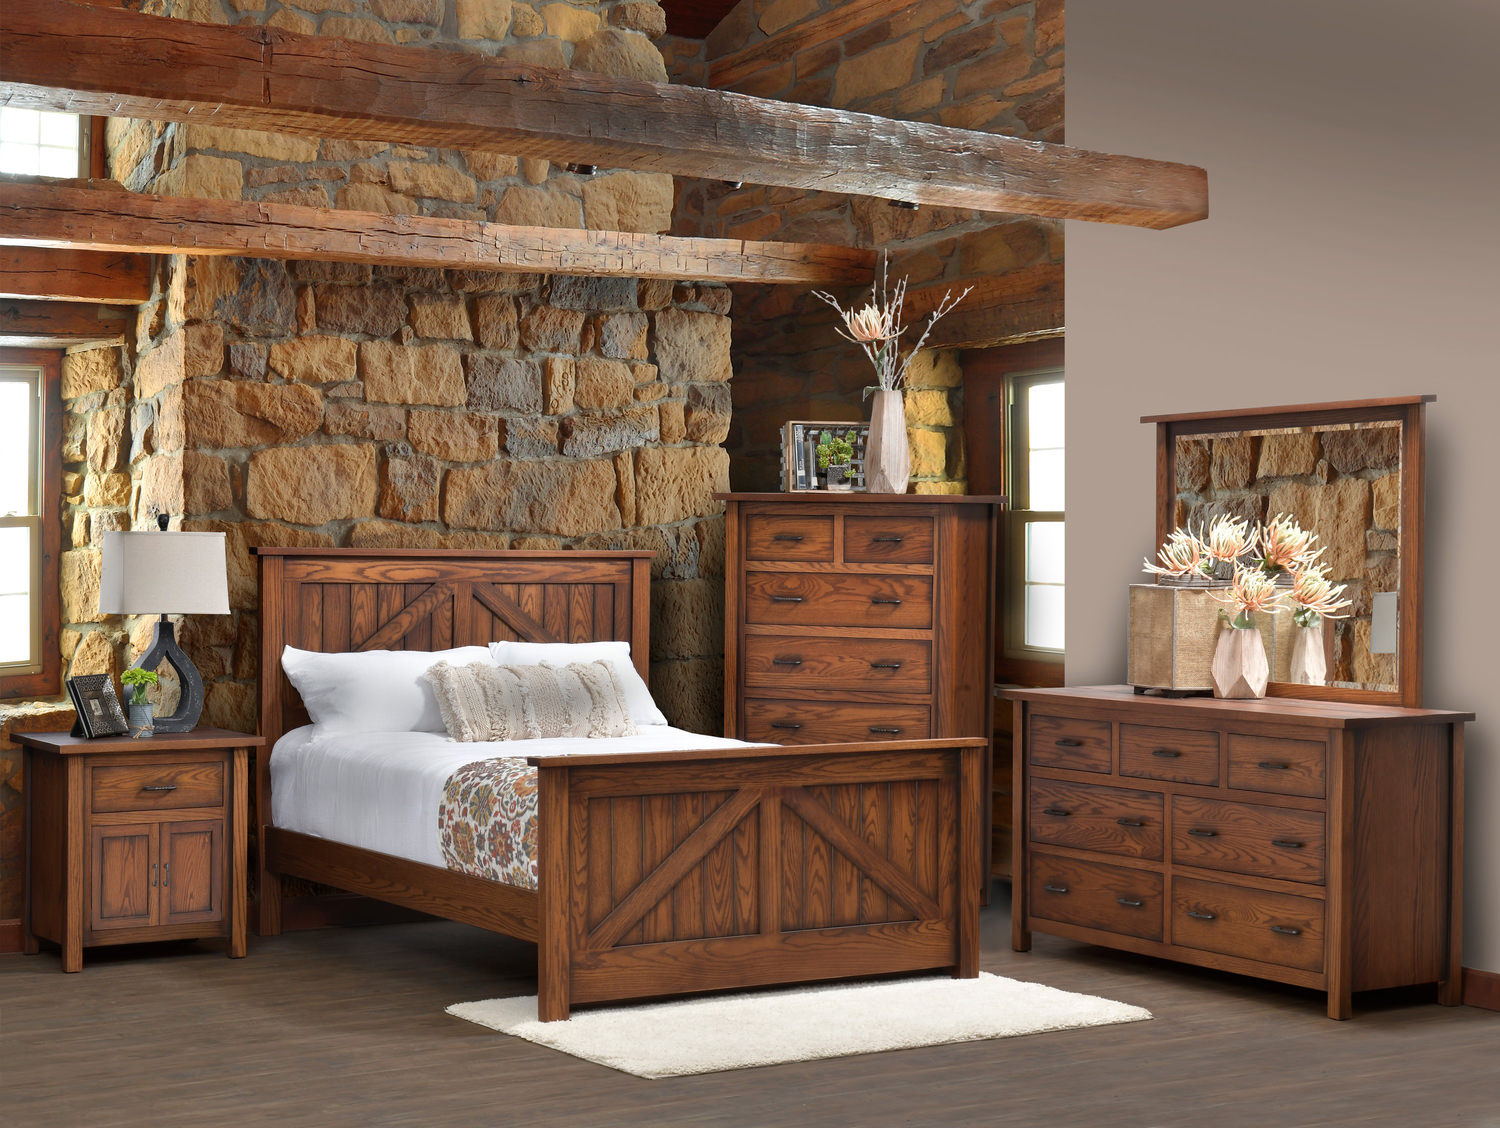 Bedroom Furniture & Accessories, Mountain Home